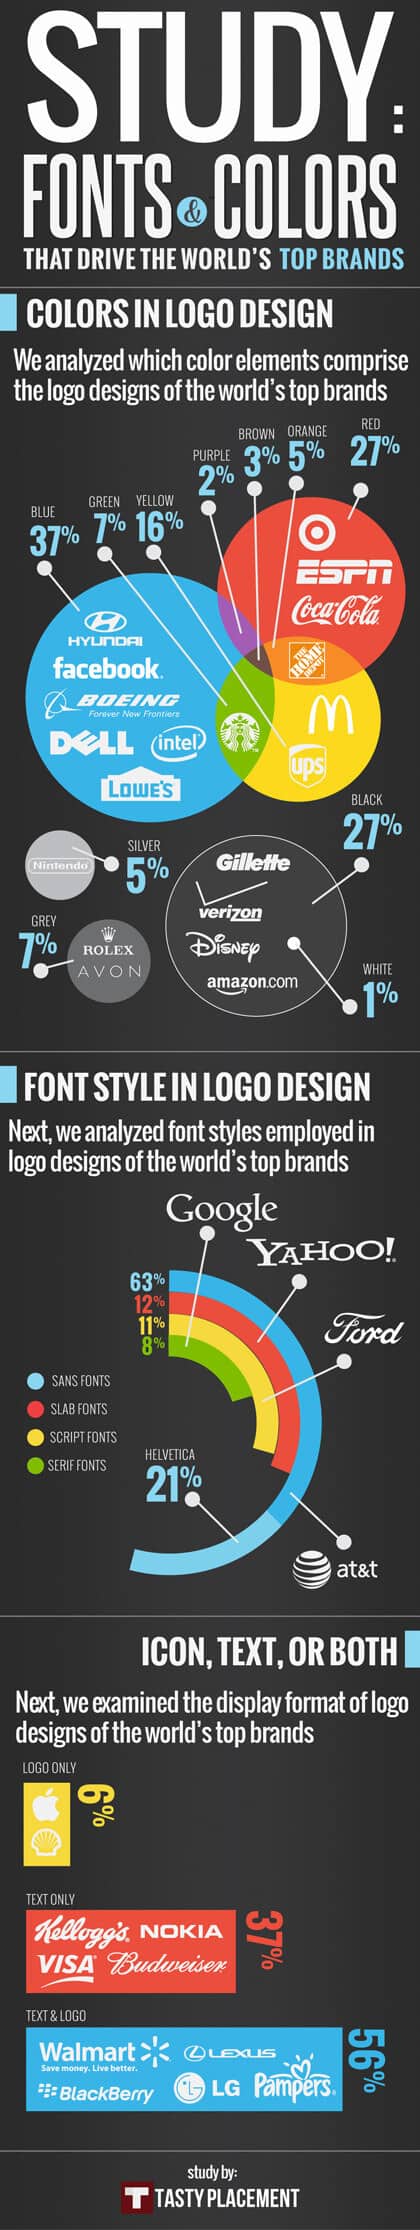 Logo-and-Font-Color-Infographic-Reduced Choosing The Right Colors And Fonts For Your Brand